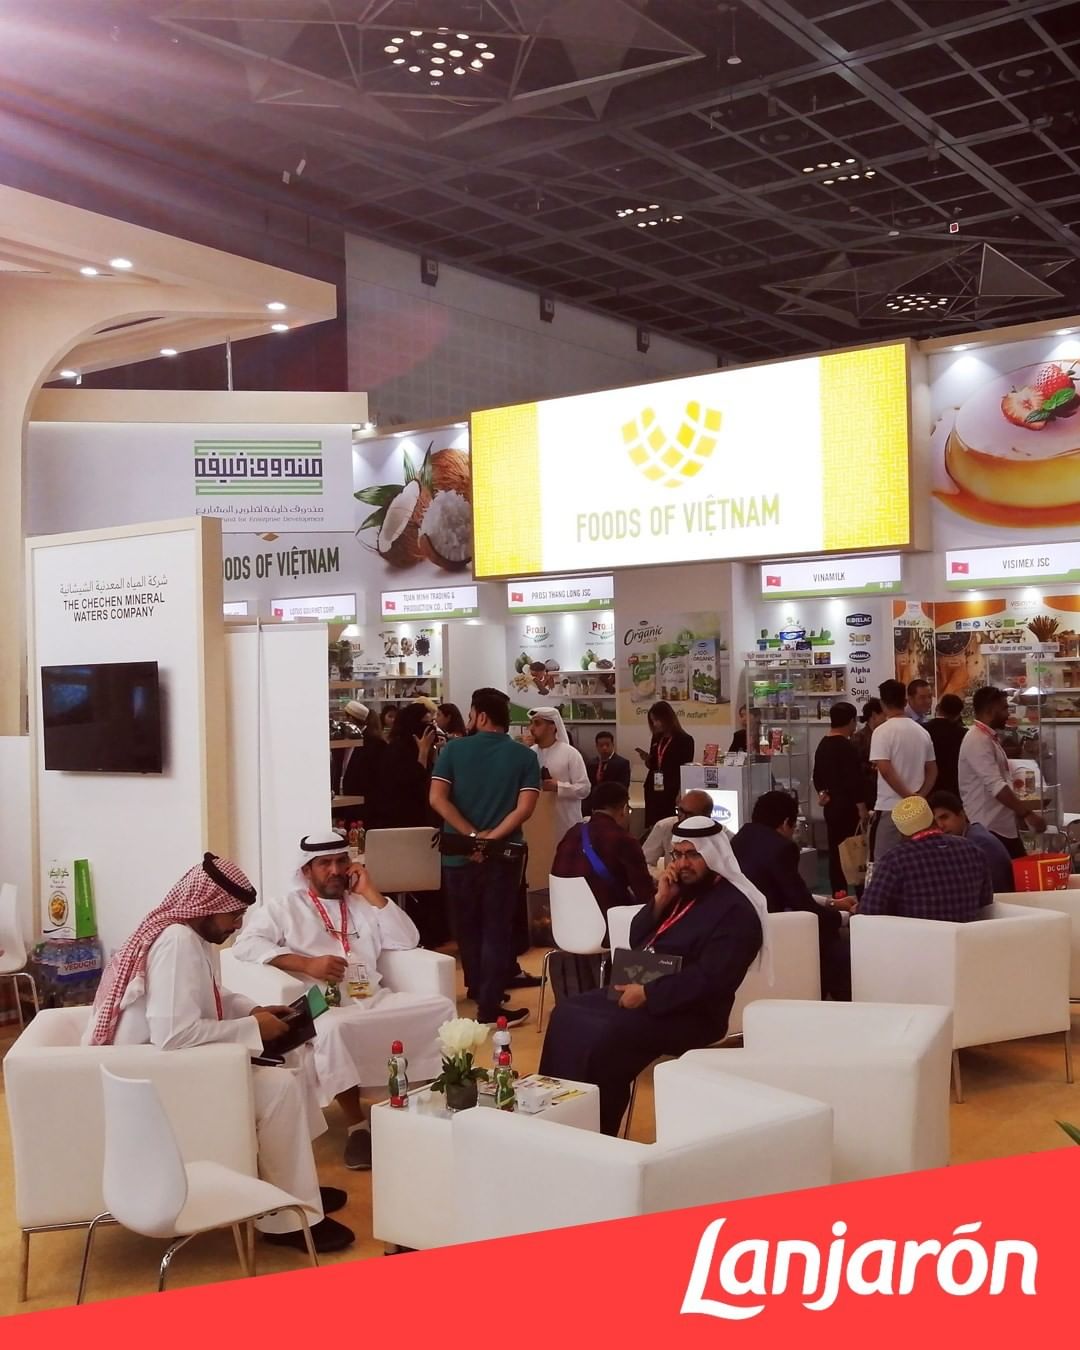 It's been a great week at the biggest annual food exhibition in the world @gulfood